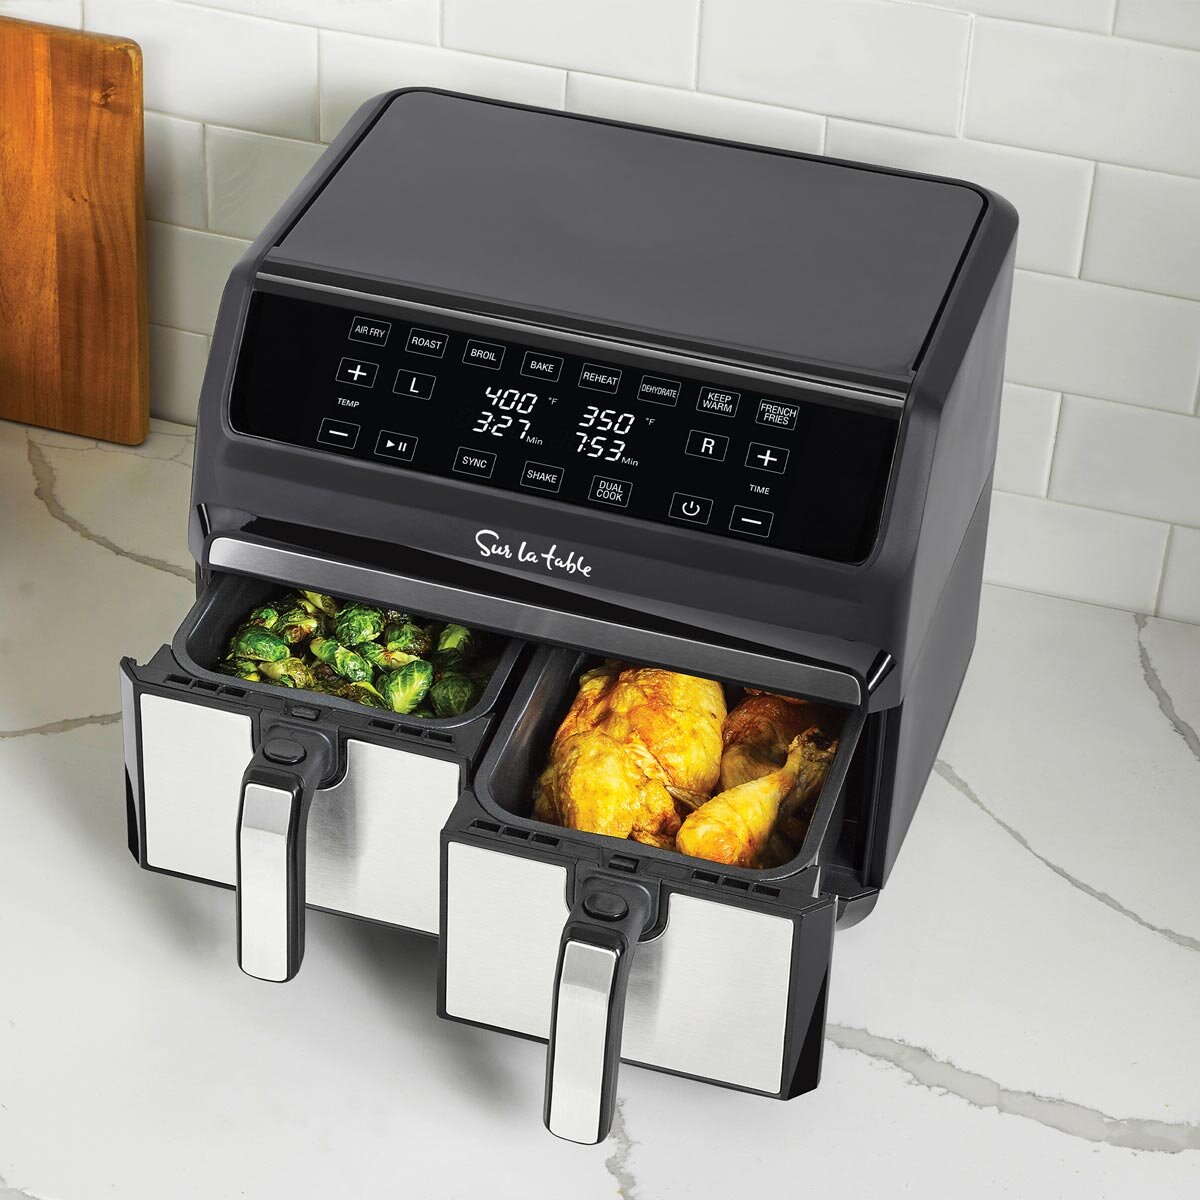 Lifestyle image of sur la table dual basket air fryer with drawers open